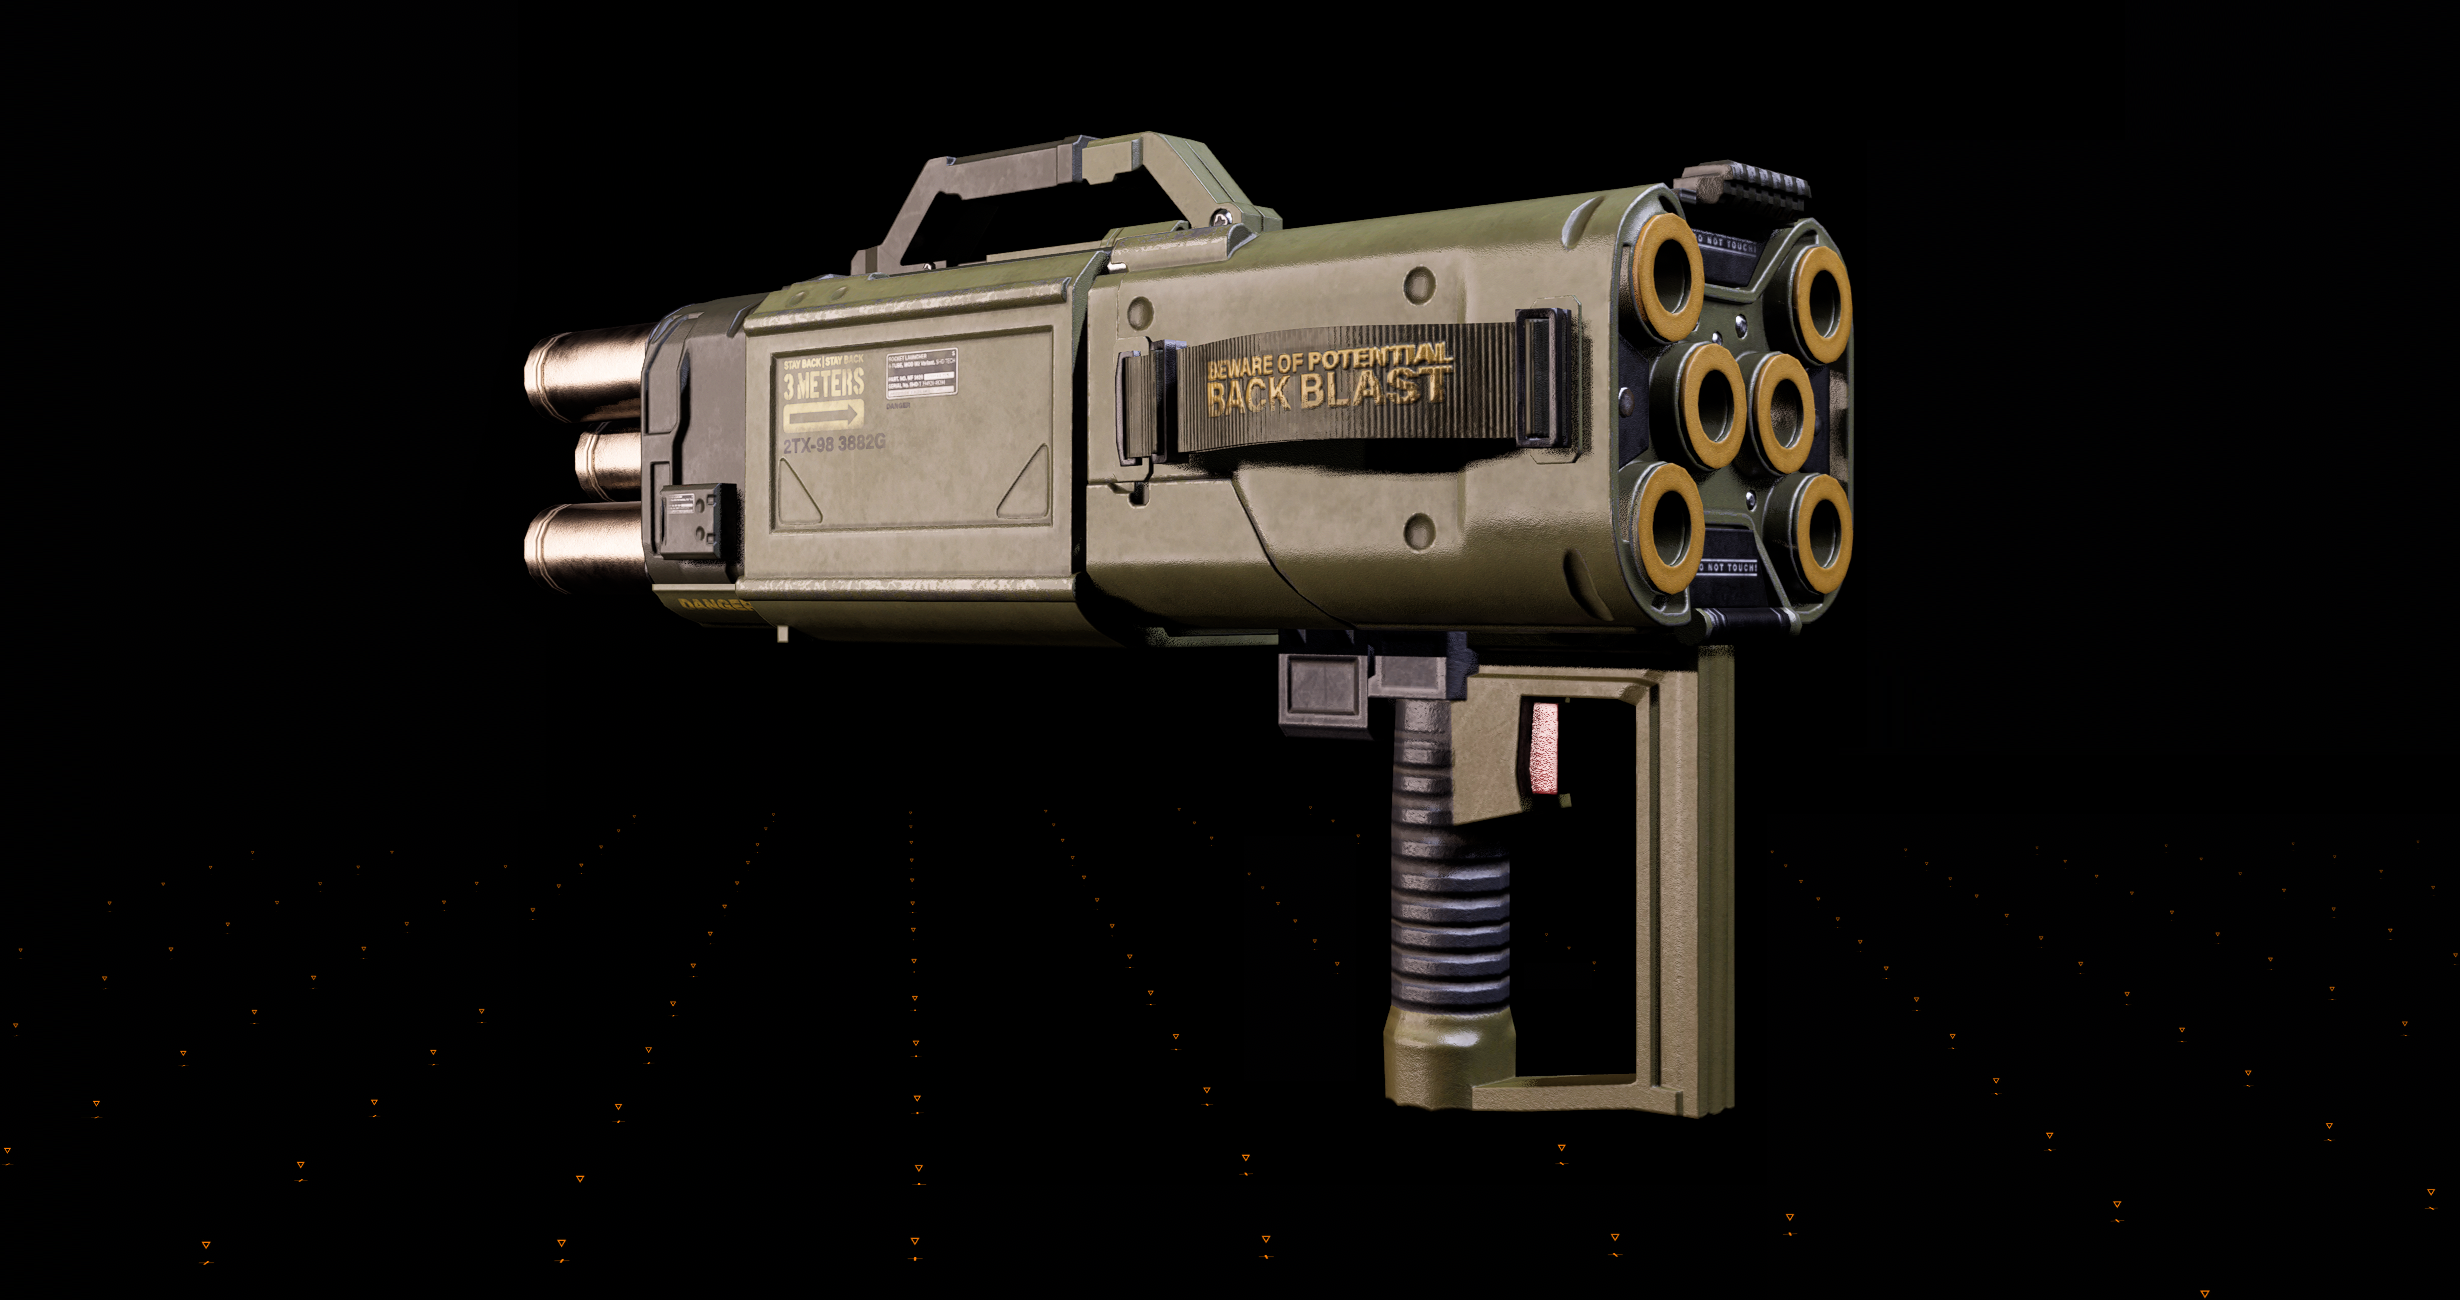 https://static.wikia.nocookie.net/thedivision/images/0/02/P-017_Missile_Launcher.png/revision/latest?cb=20221013185618